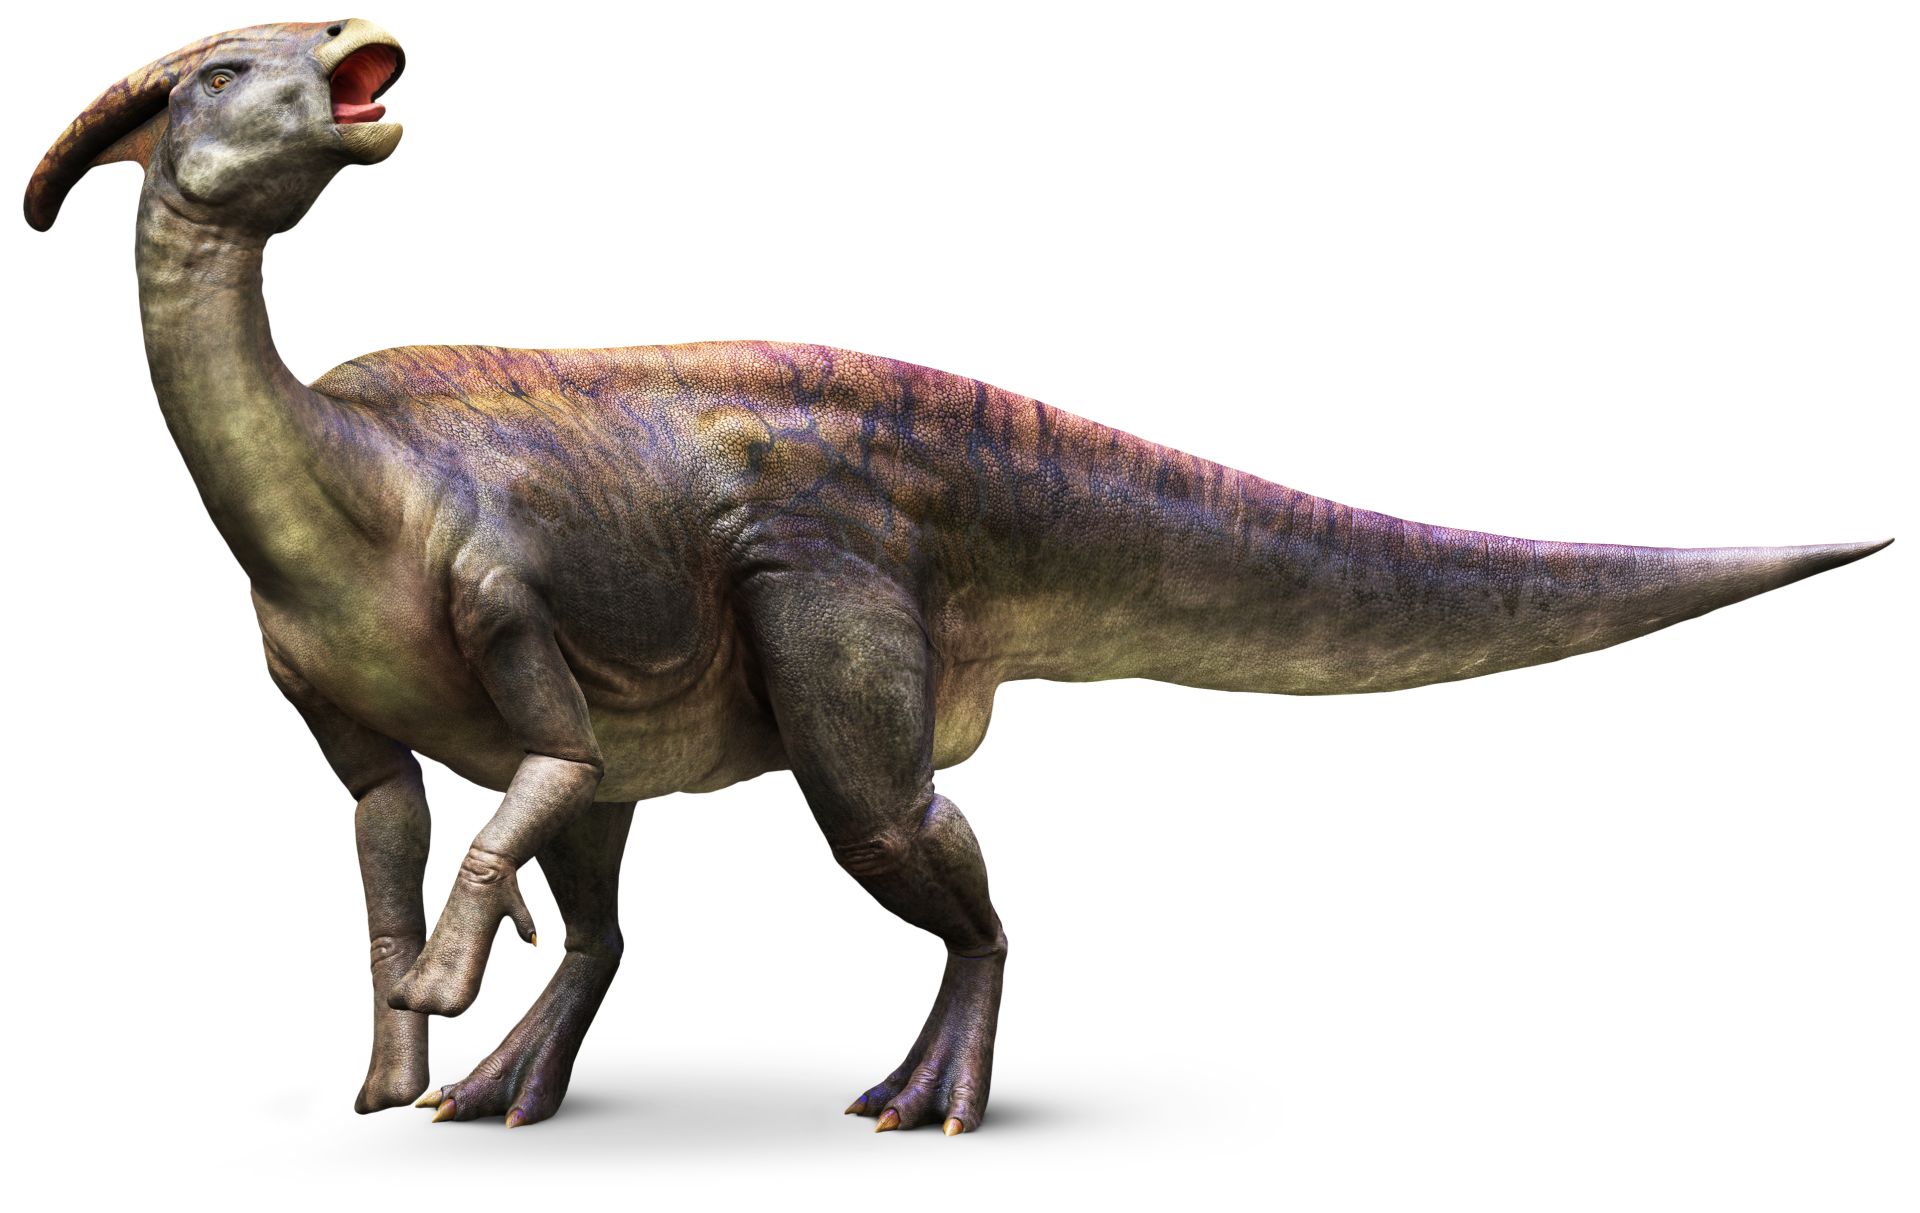 The Daily Crate | QUIZ: Can You Name These Dinosaurs That Appear In Jurassic World?